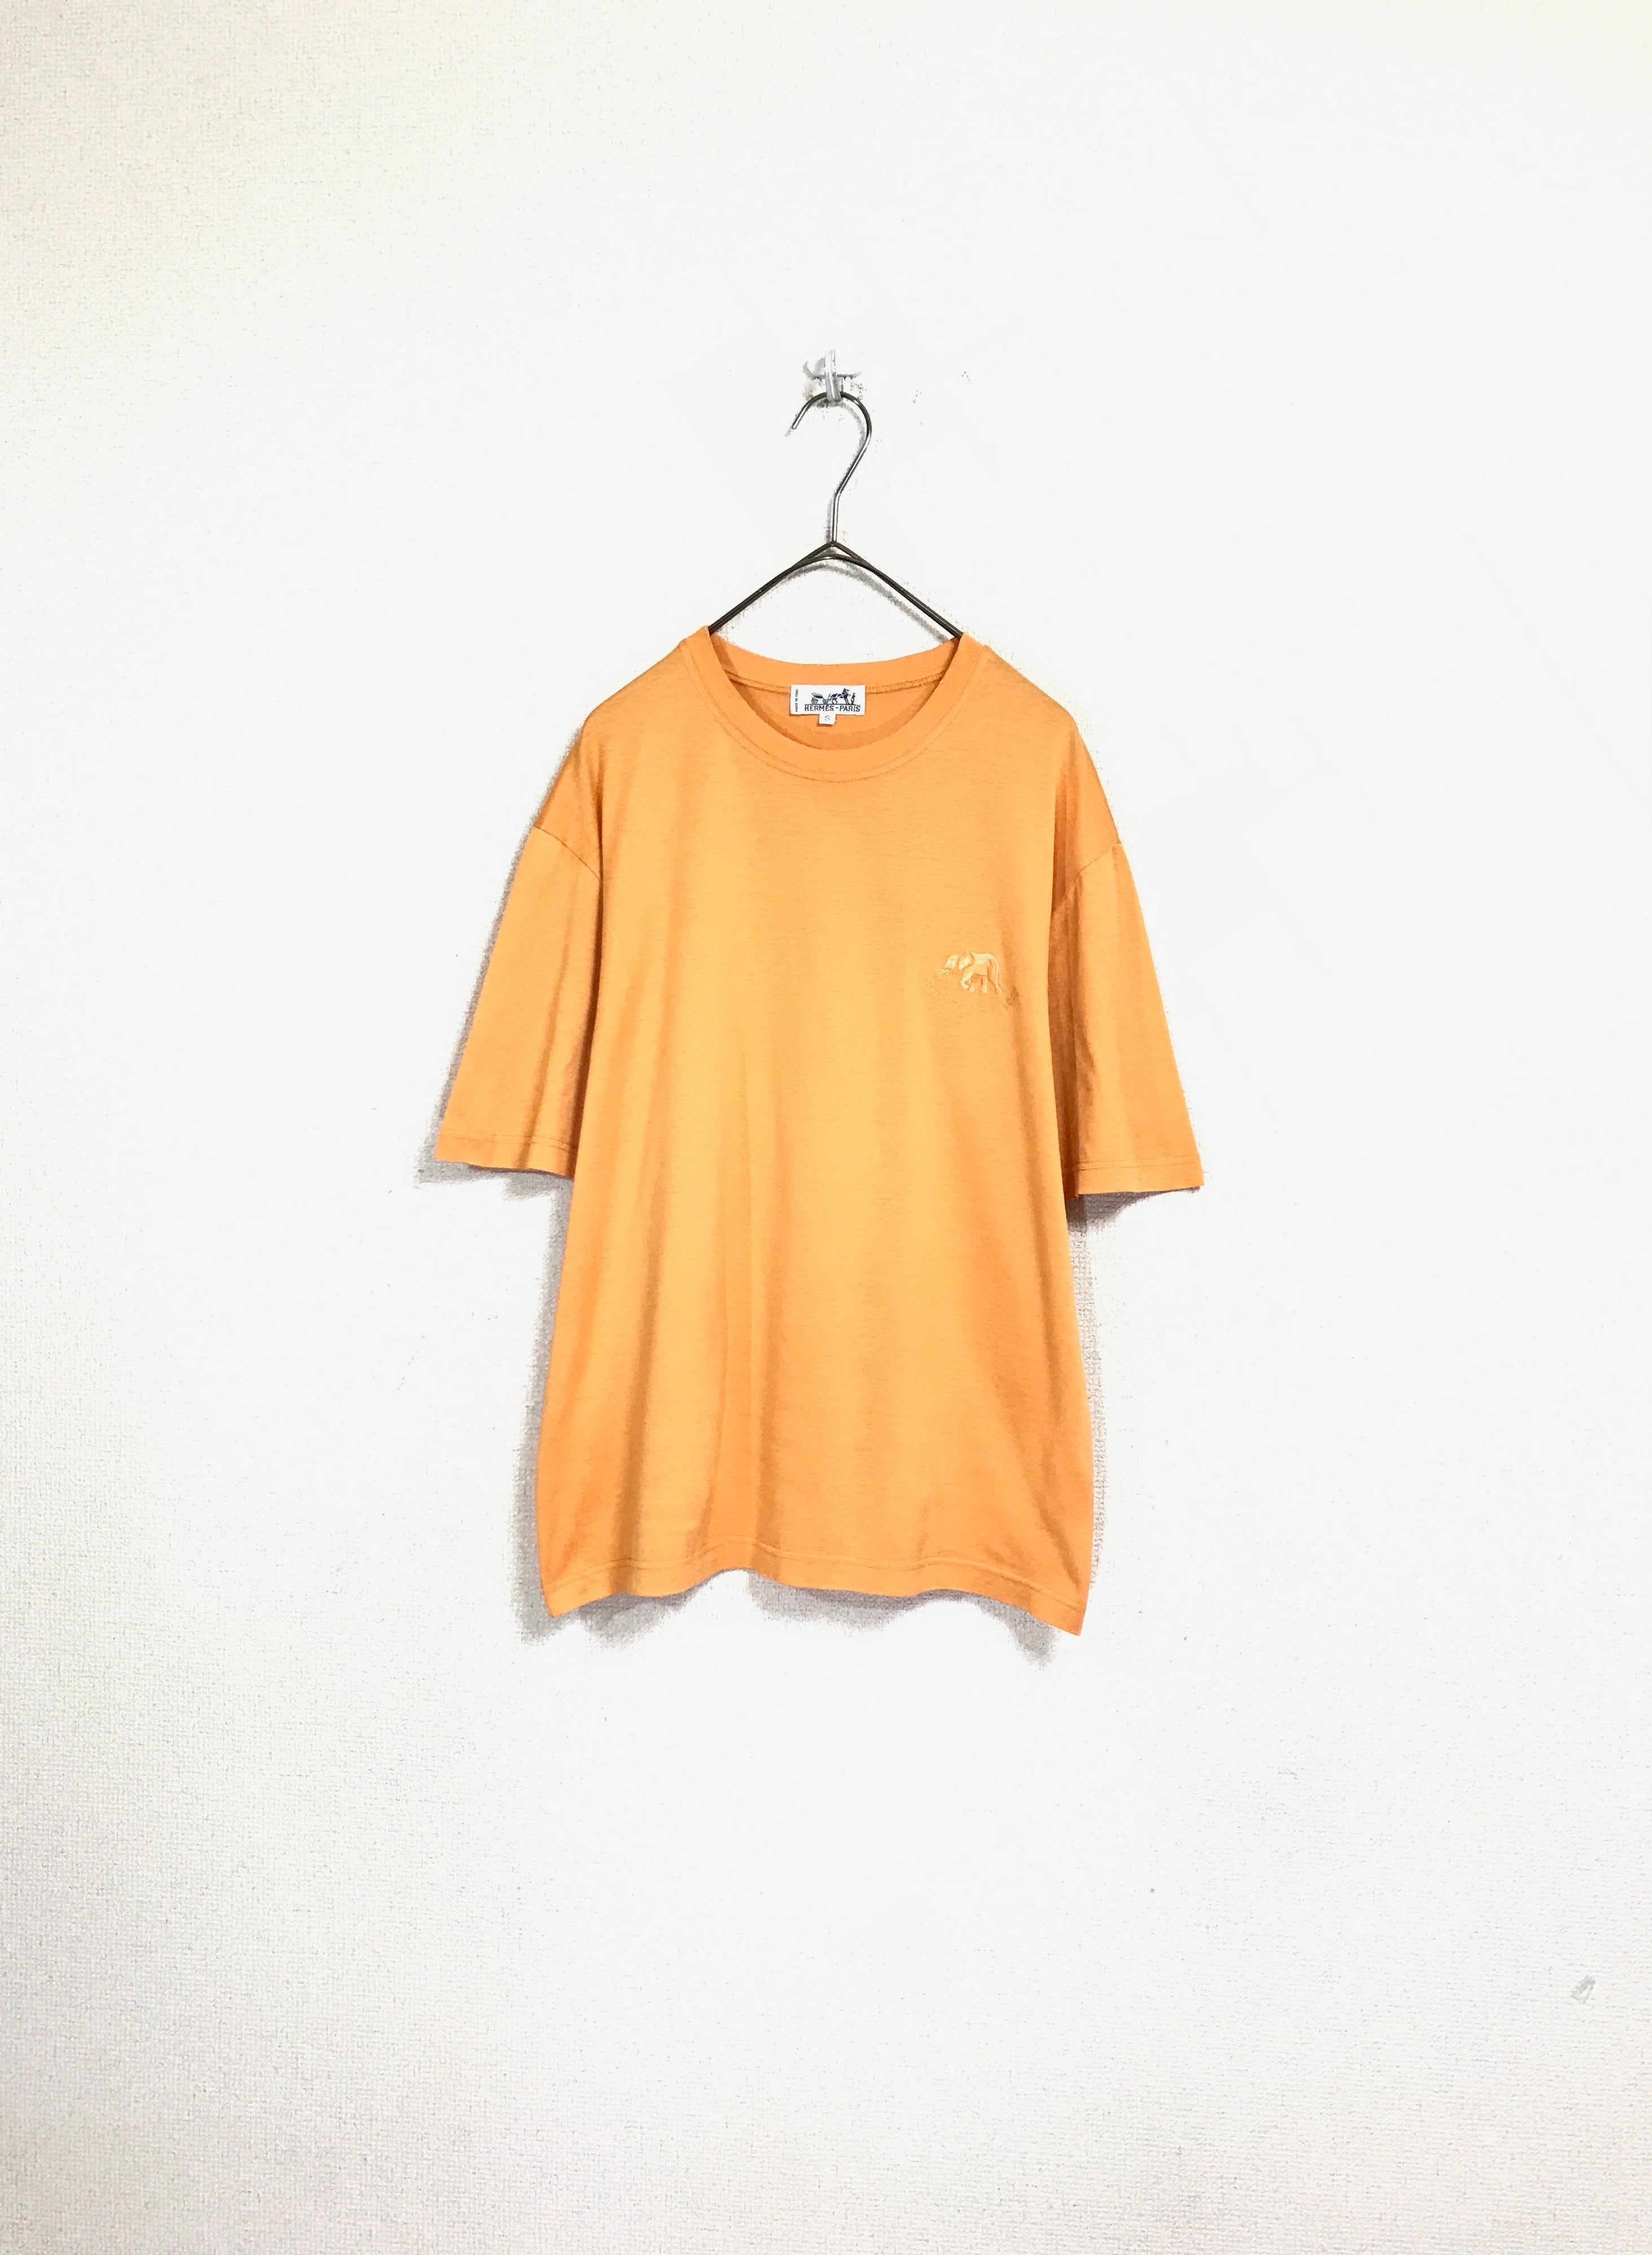 70-80's HERMES mercerized cotton T-shirt with embroidery